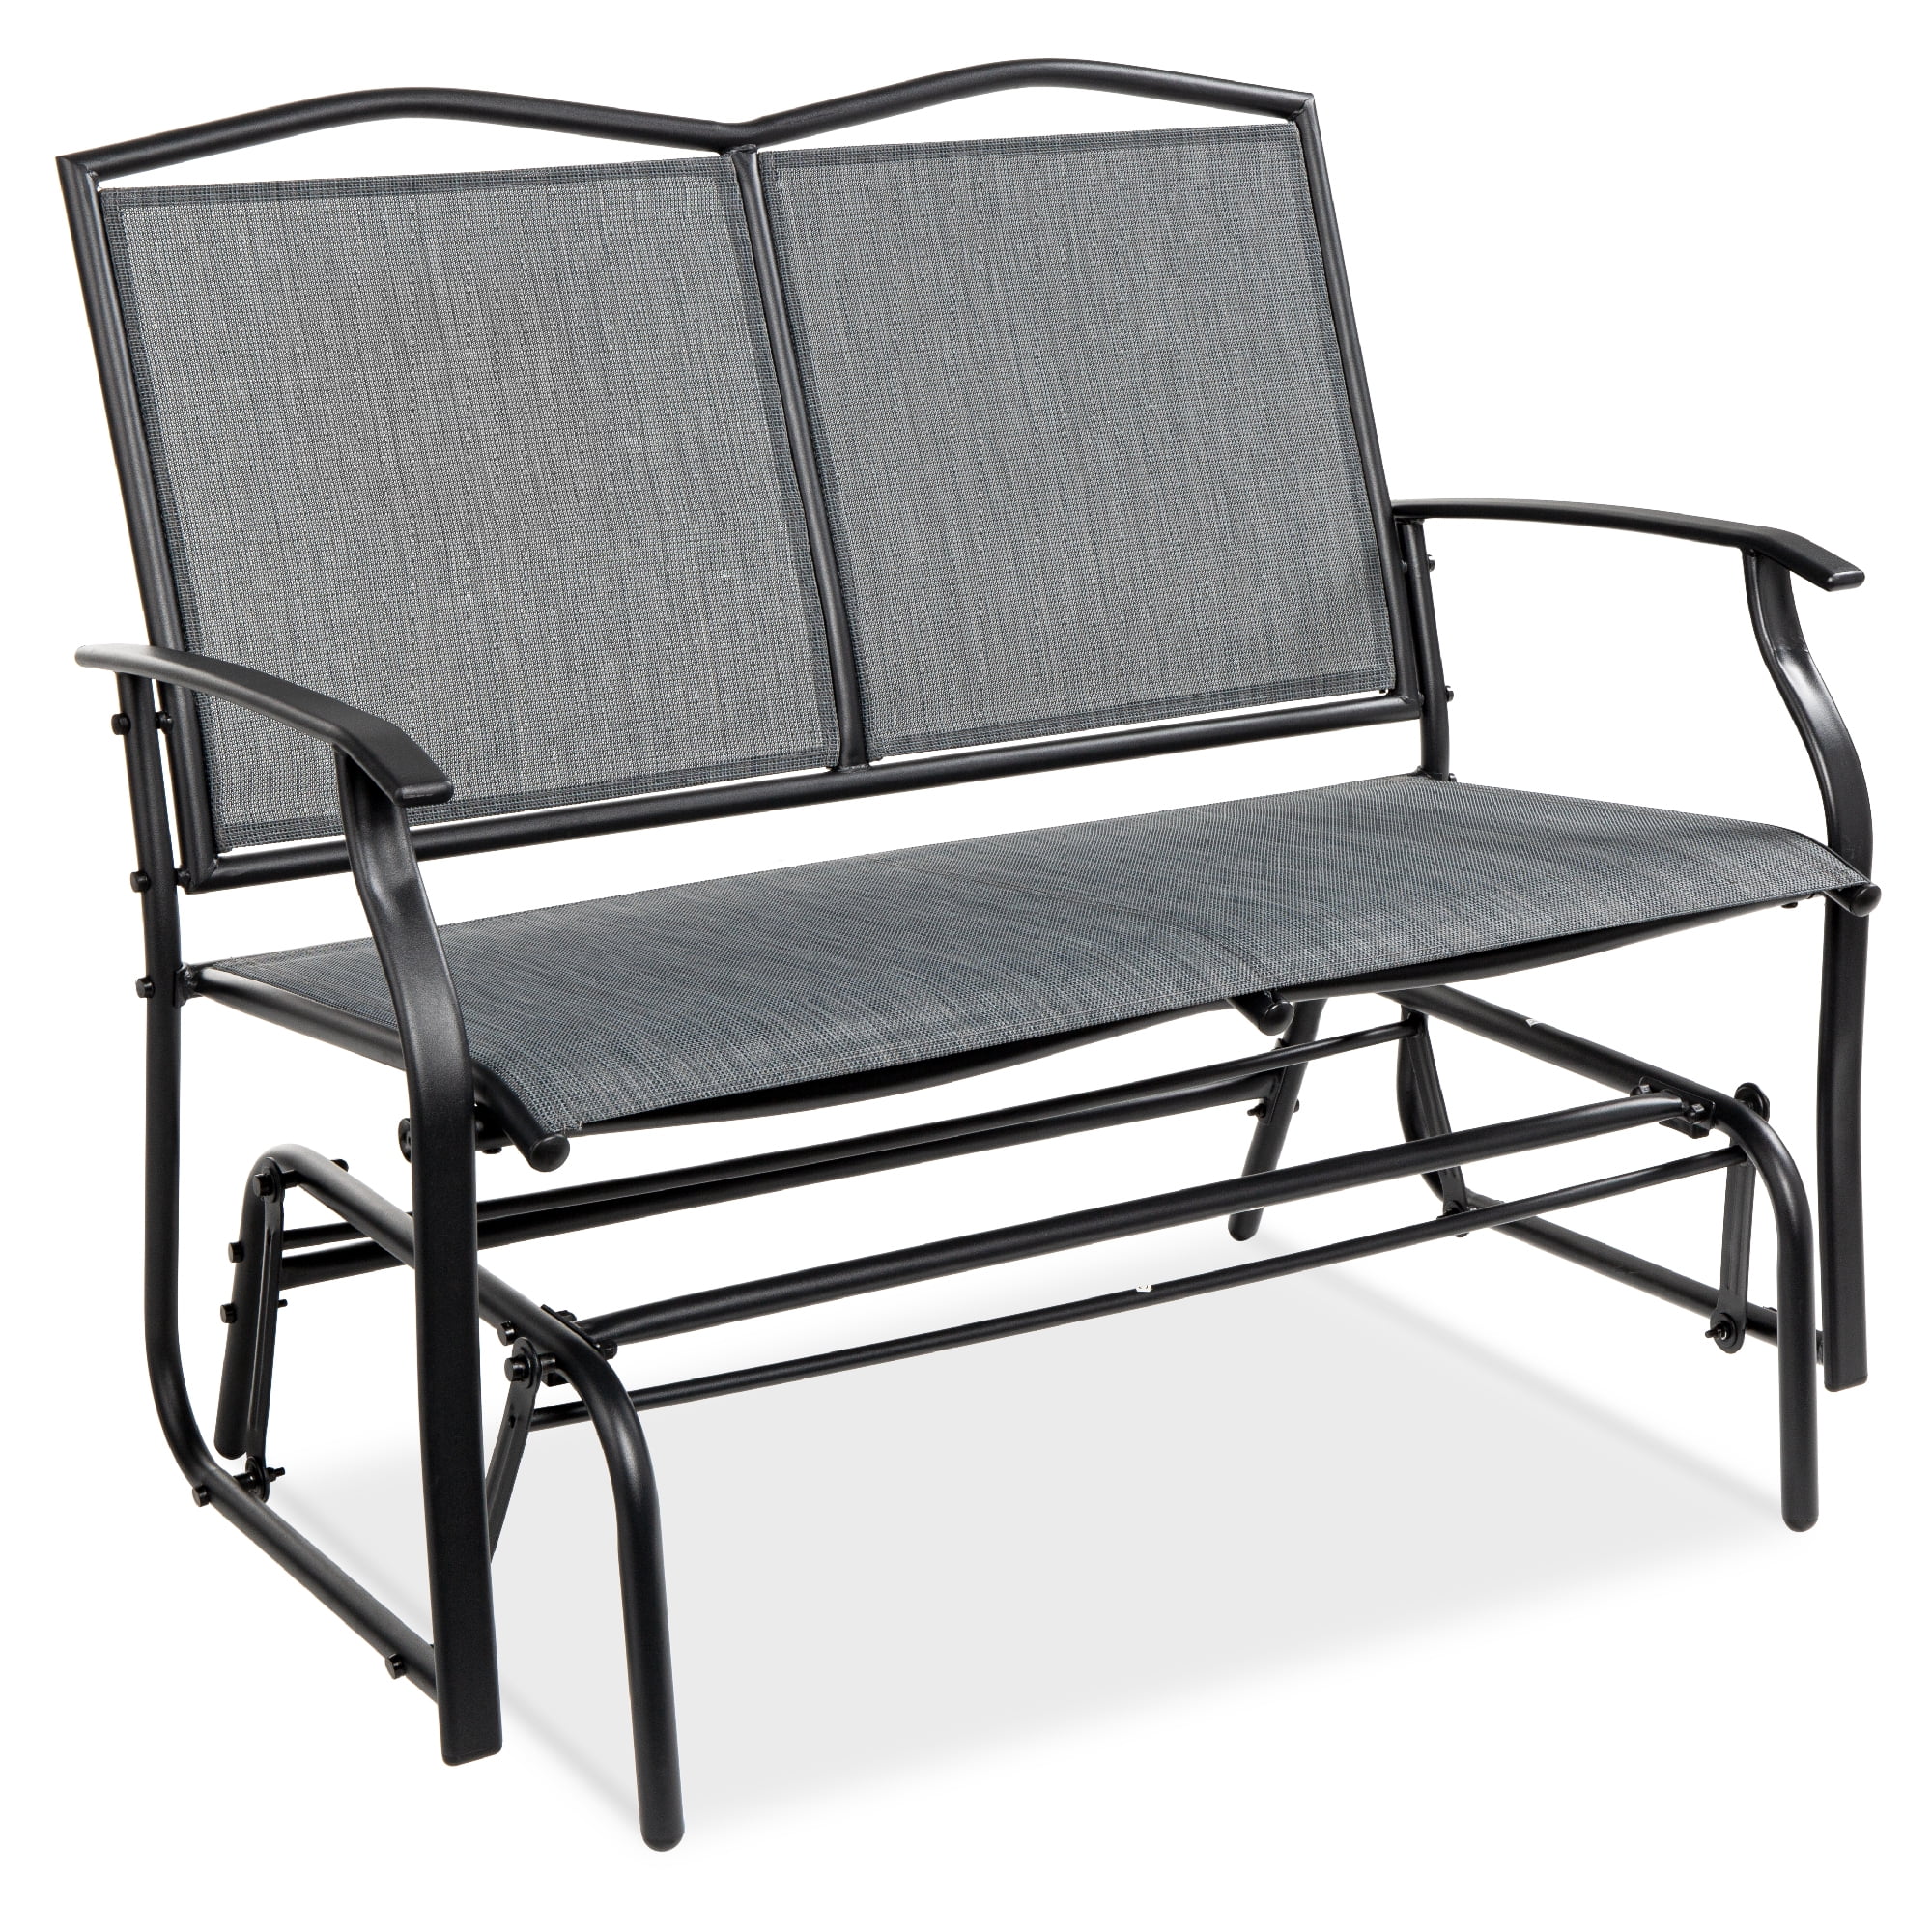 Details about   Patio Glider Rocking Seat Bench Loveseat Steel Frame 2 Person Outdoor Furniture 